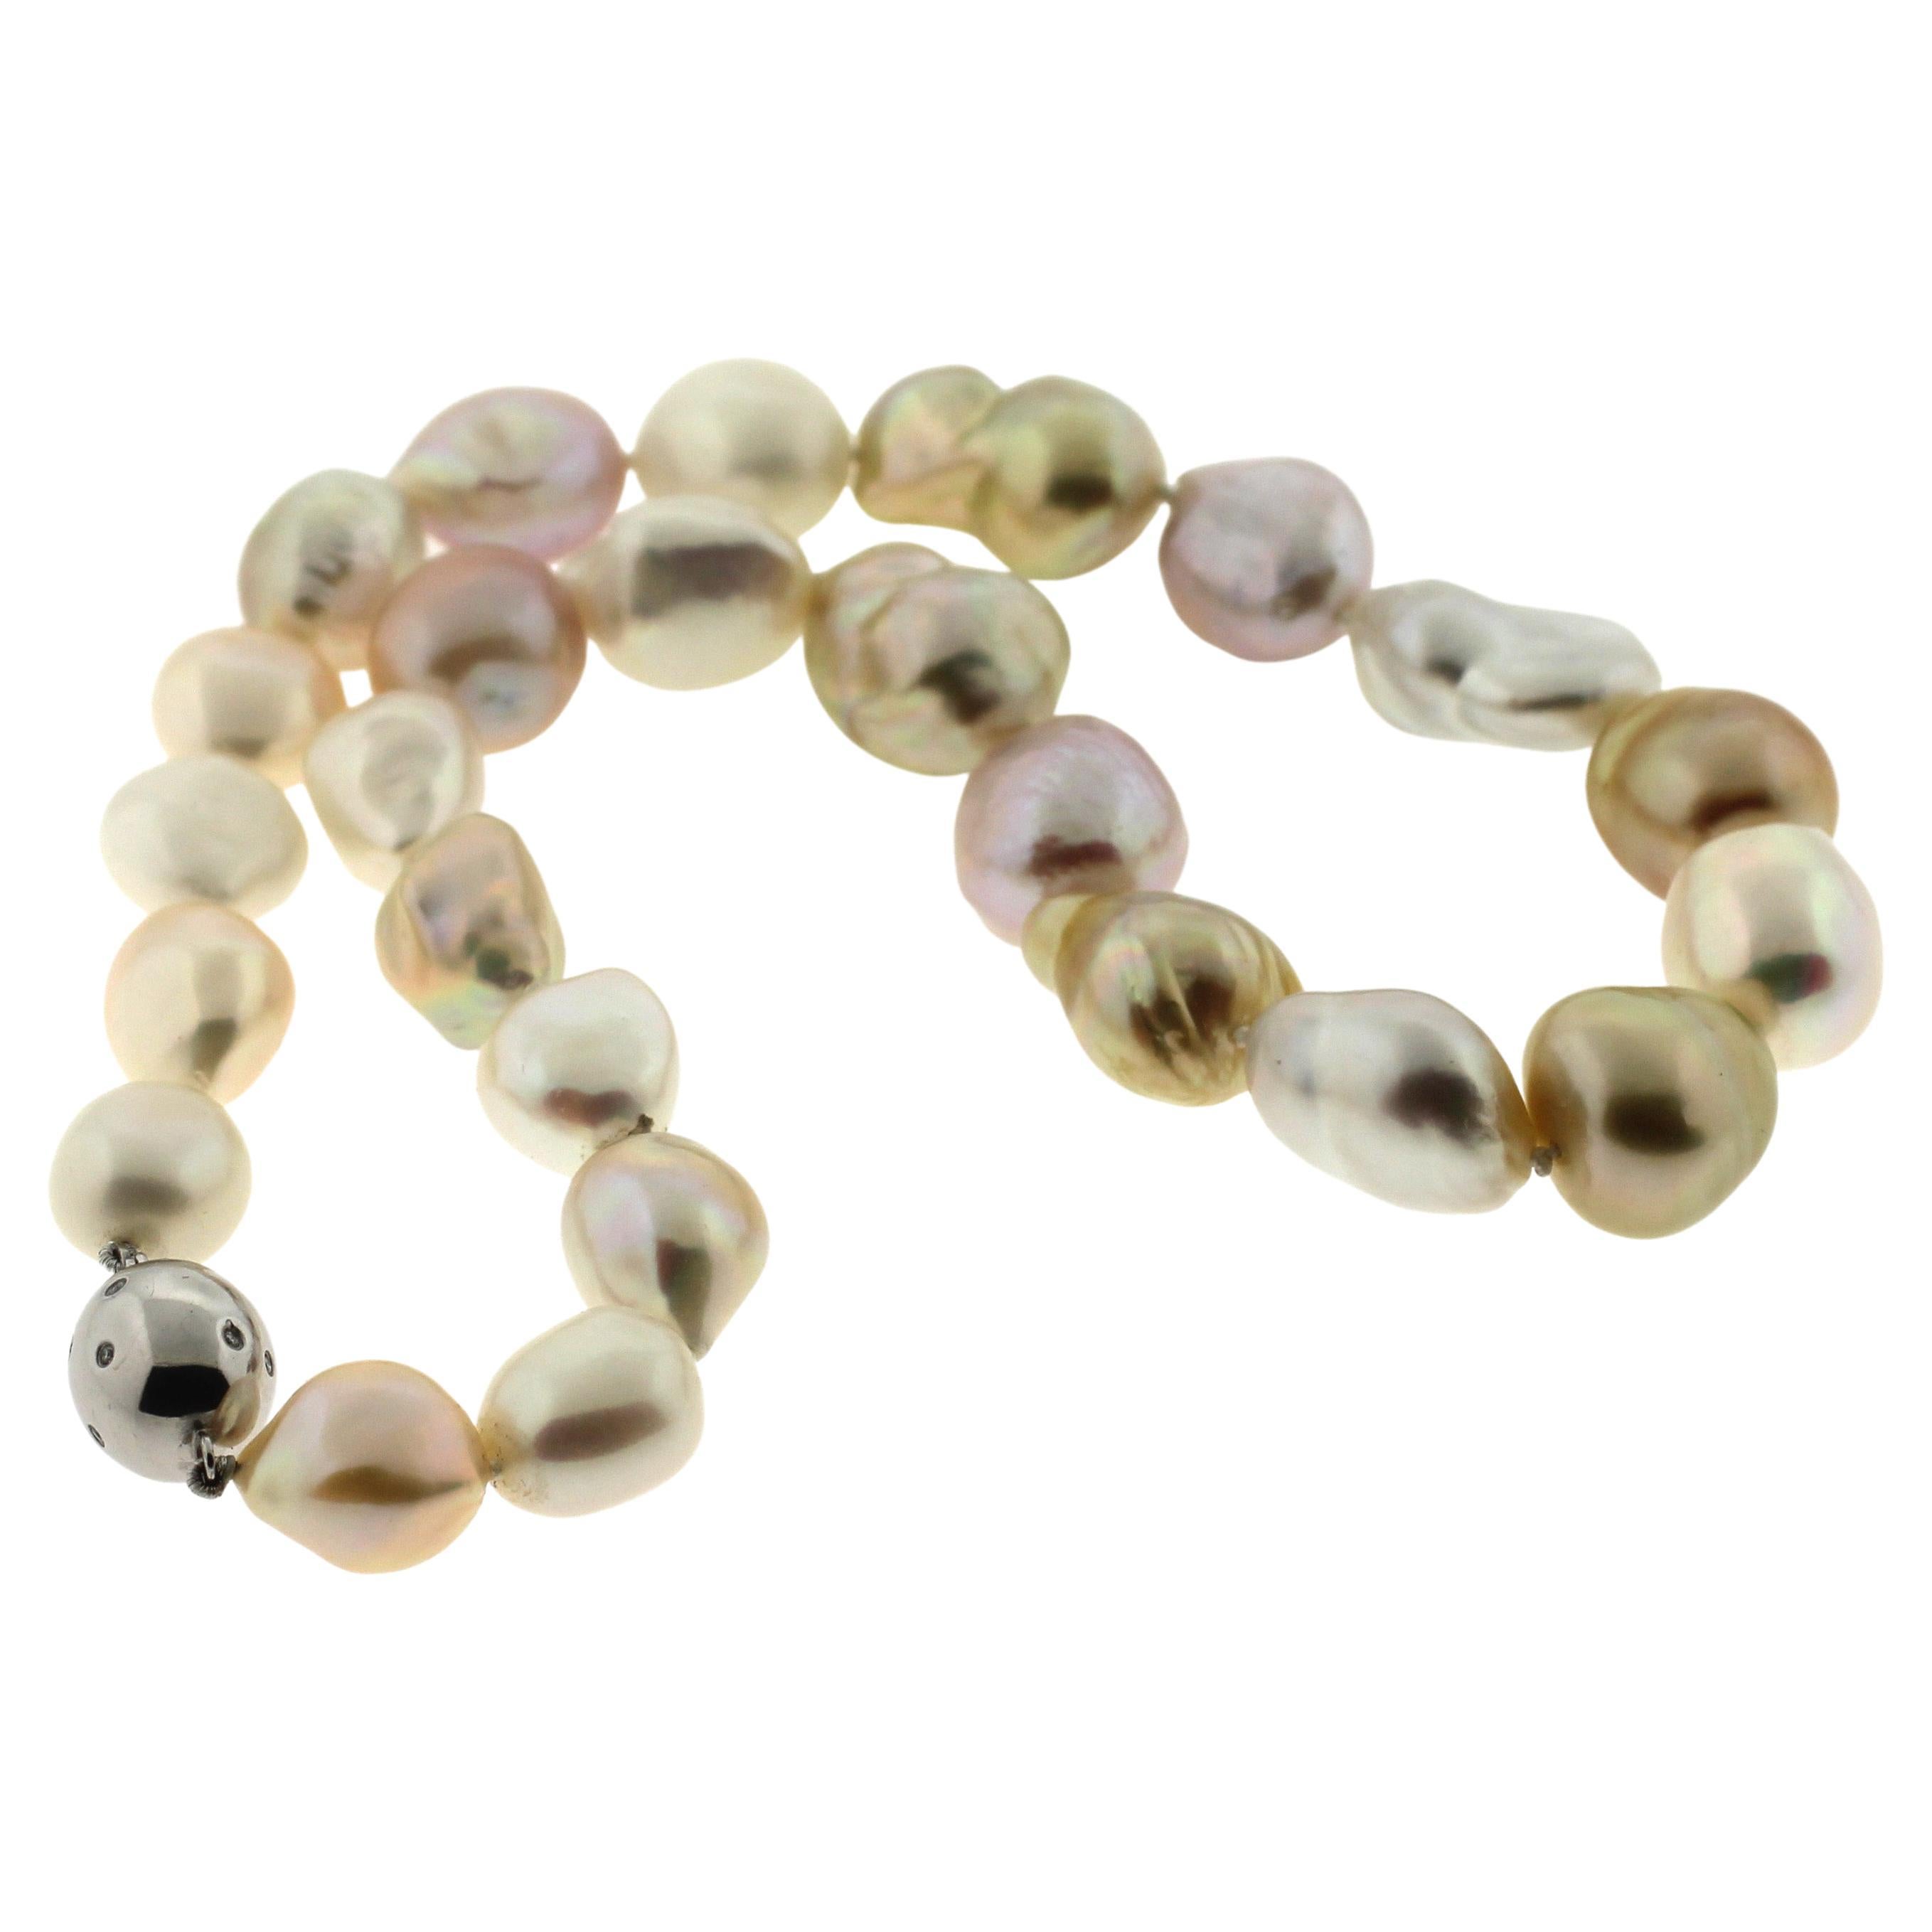 Hakimoto By Jewel Of Ocean 18K Strand Necklace
18K White Gold  
Weight (g): 81.3
Cultured Golden South Sea and Fresh Water Baroque Pearl 
Pearl Size: 12X15mm 
Pearl Shape: Baroque
Body color: Natural Gold and Pastel Color
Orient: Very Good
Luster: